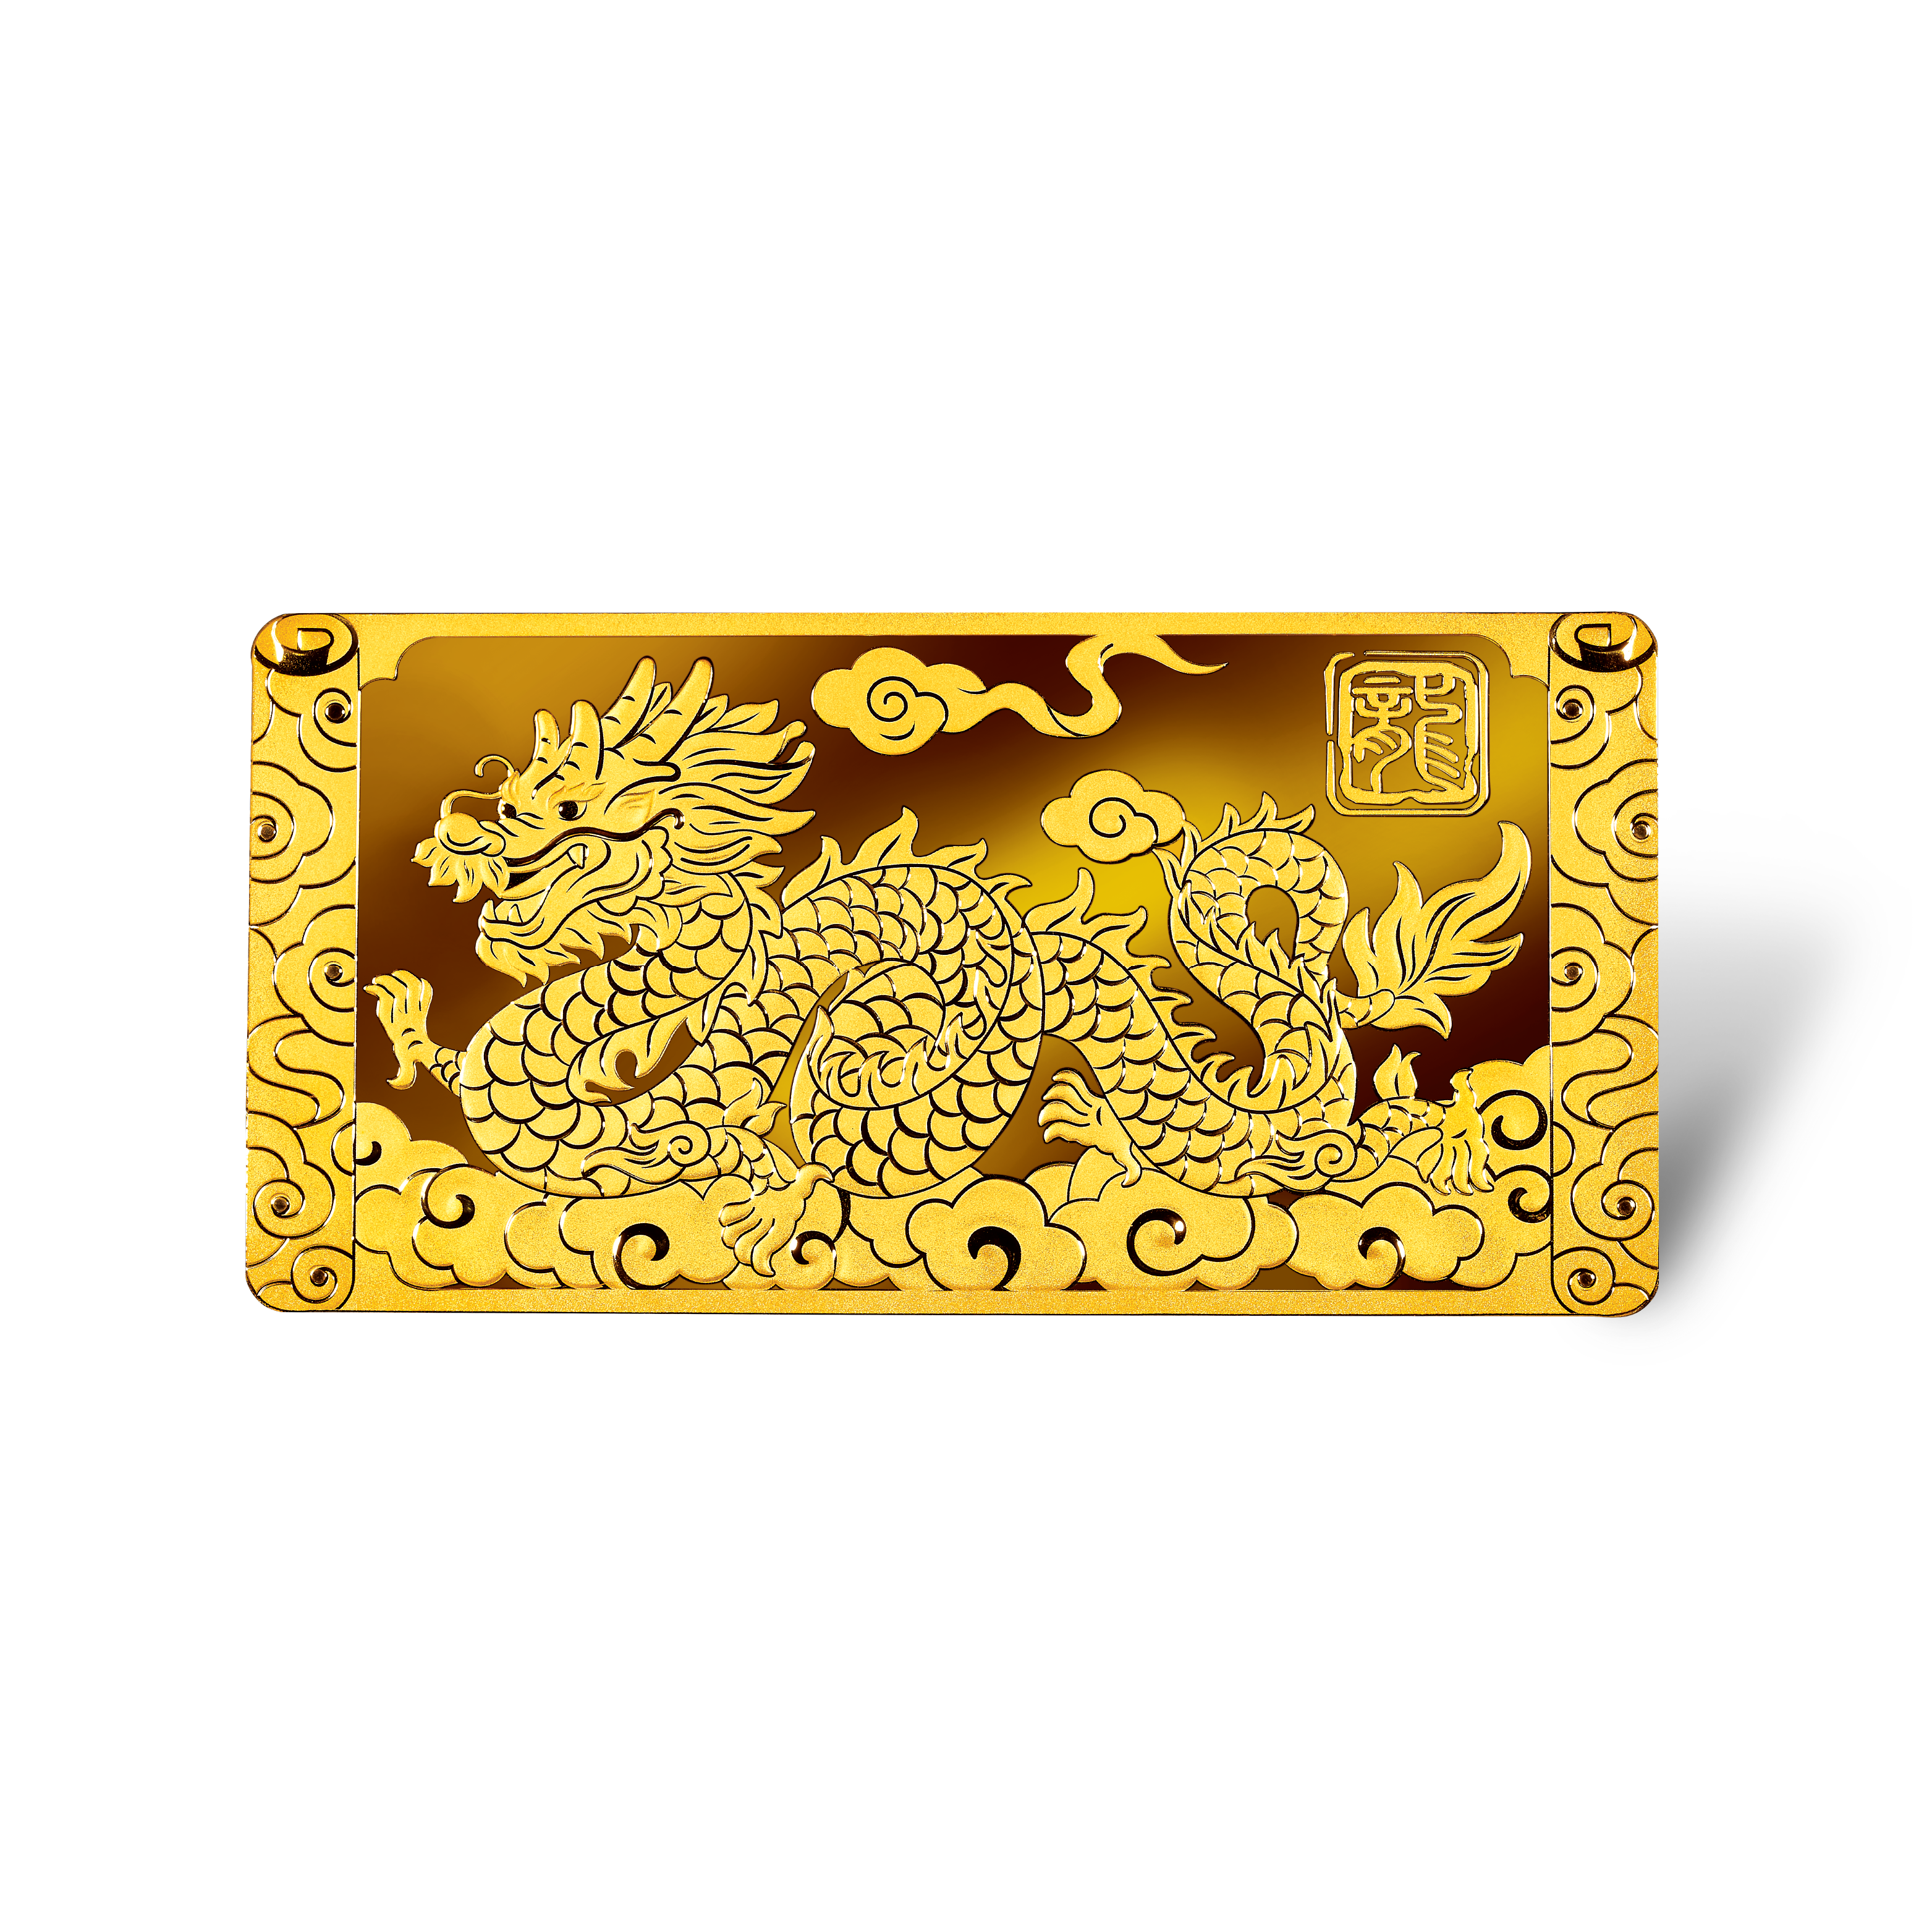 Fortune Dragon Collection "Flying Dragon" Wide Gold Bar